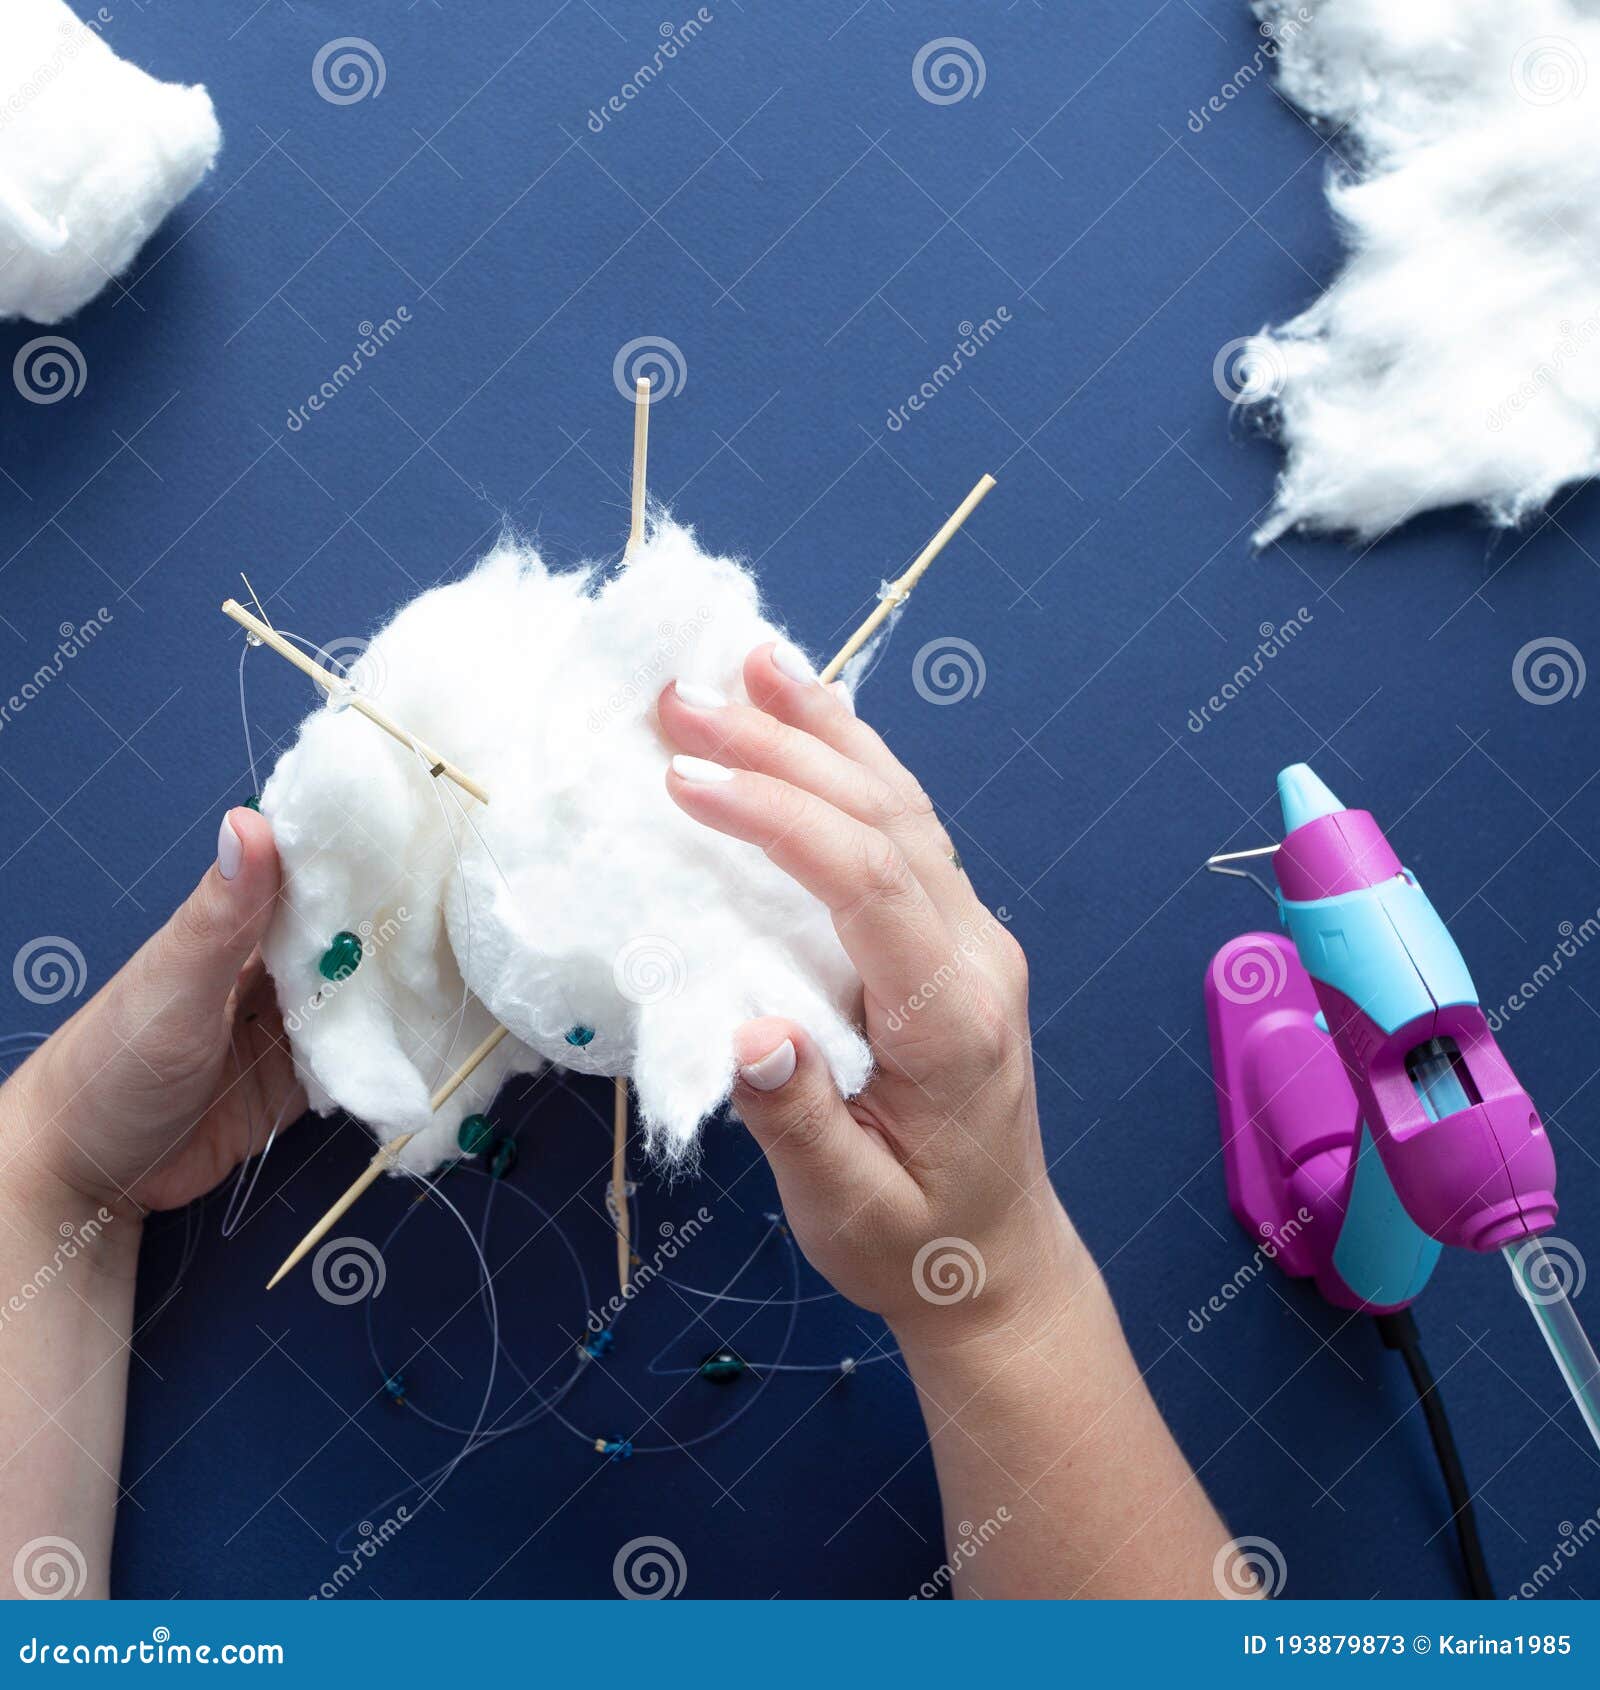 How To Make Cotton Clouds for Kids Room. Step by Step Instructions ...